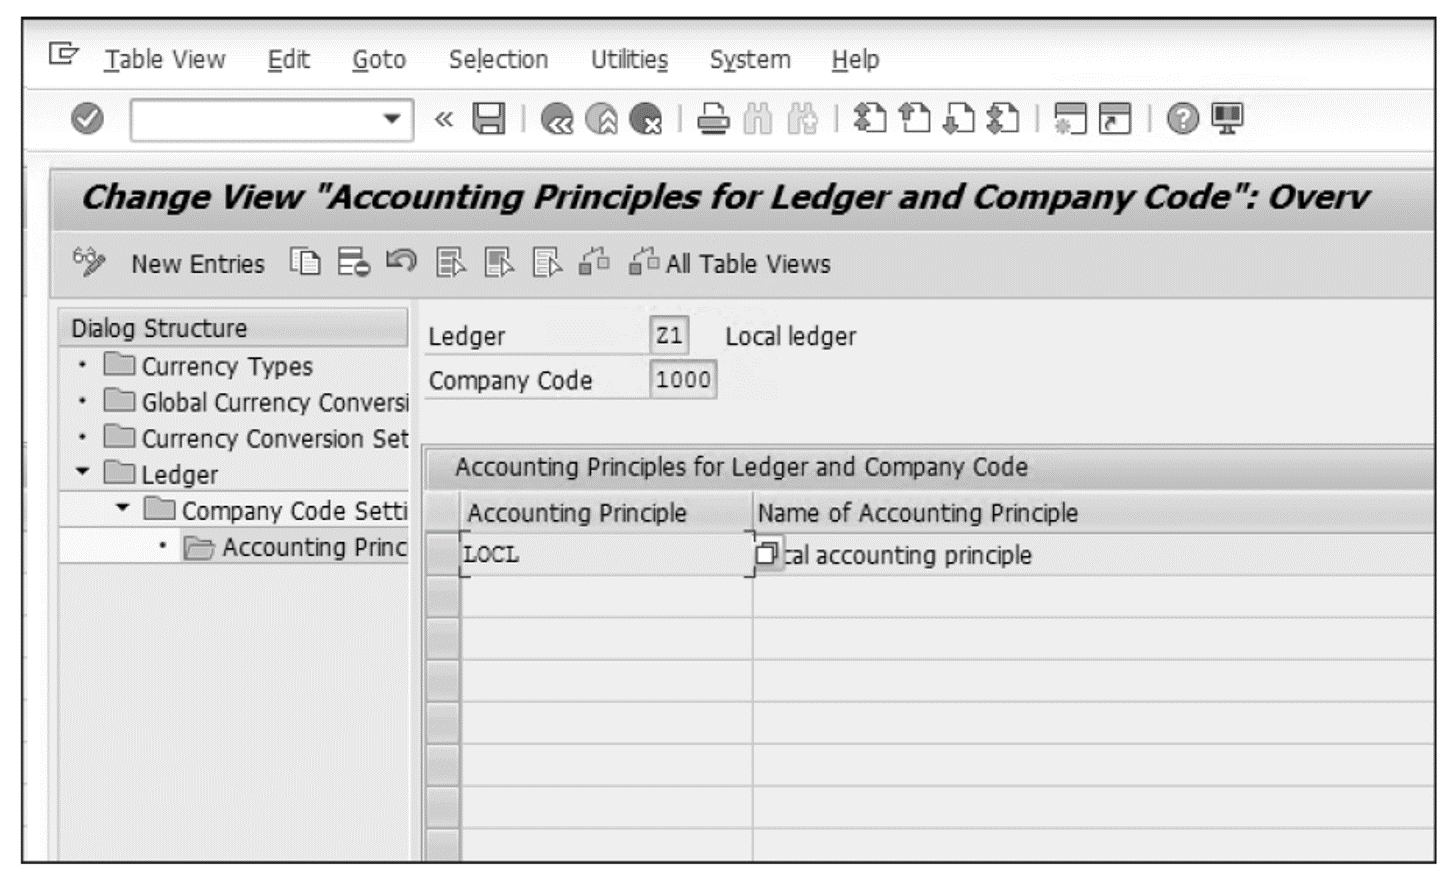 Mapping of Accounting Principle to Ledger